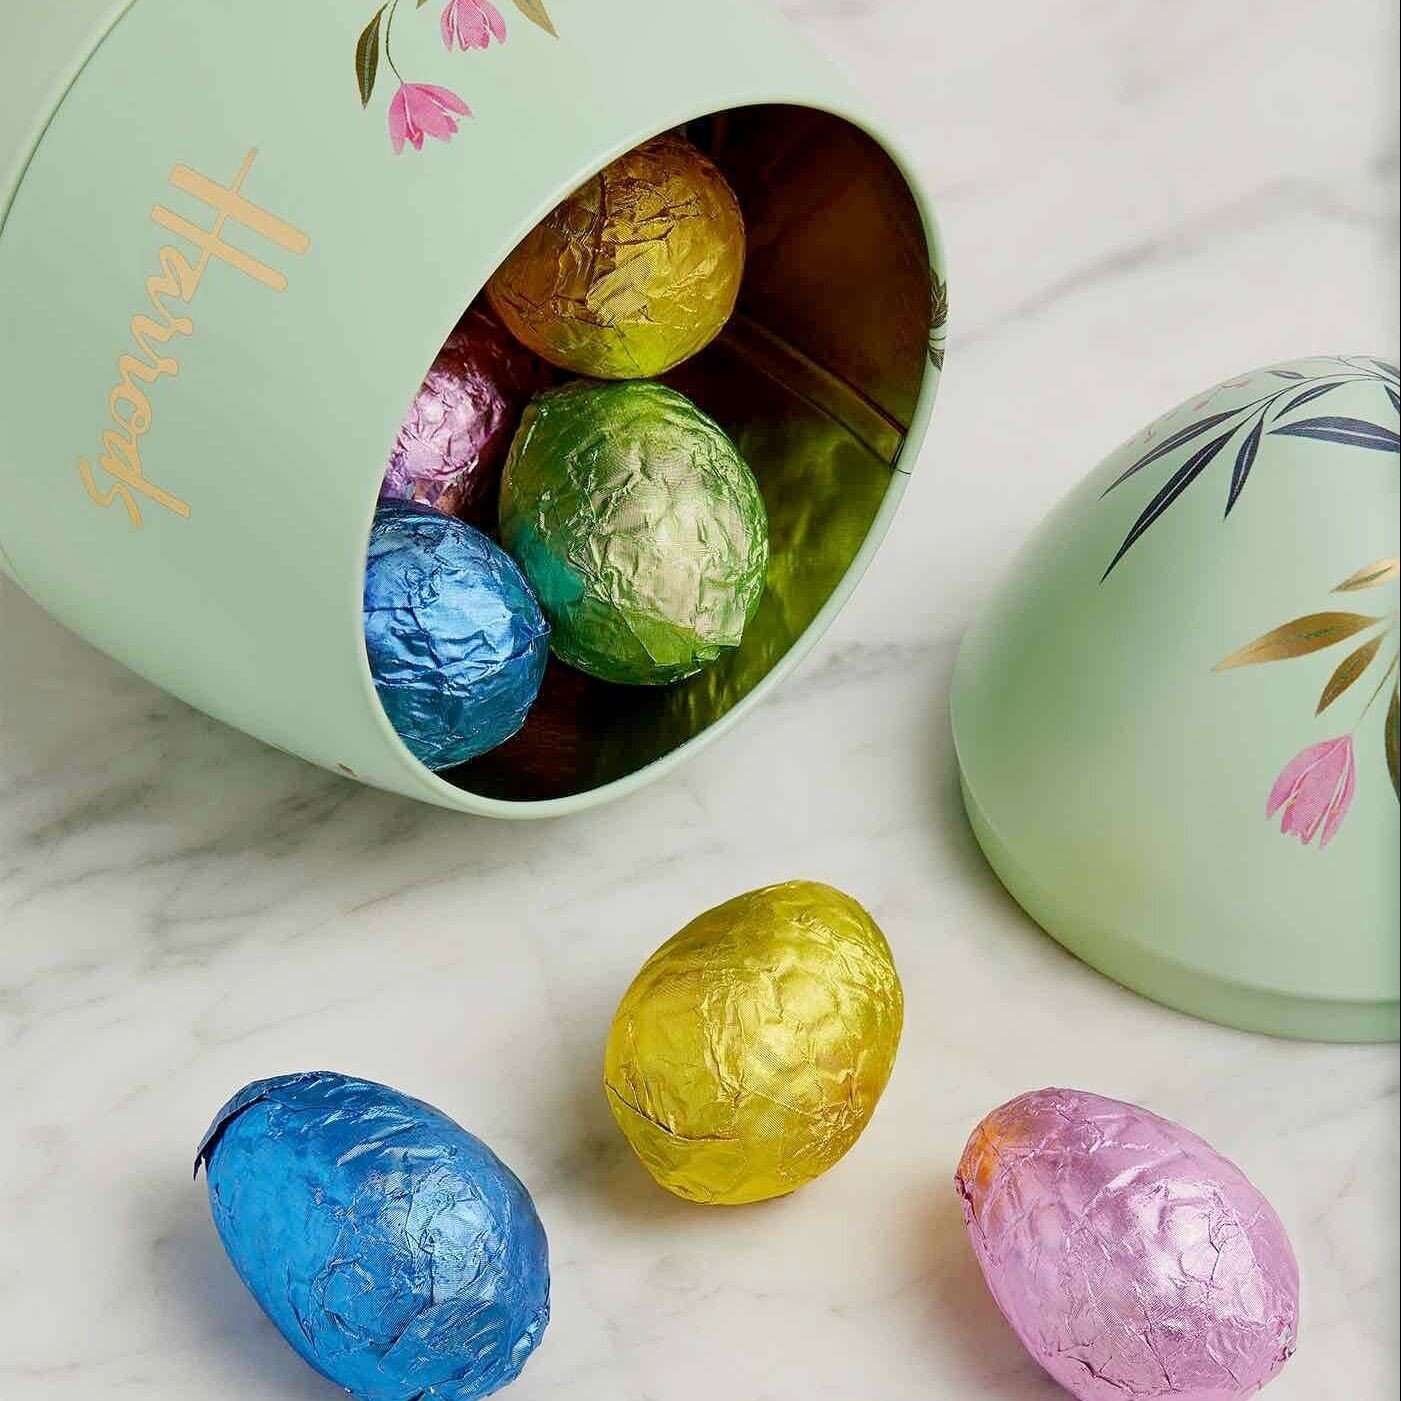 Looking for something special for clients and colleagues ahead of Easter next week? Then @harrods Corporate Service is the answer! Their Easter collection has a beautiful range of decadent gifts to suit any brief or budget. It includes the Harrods Ea